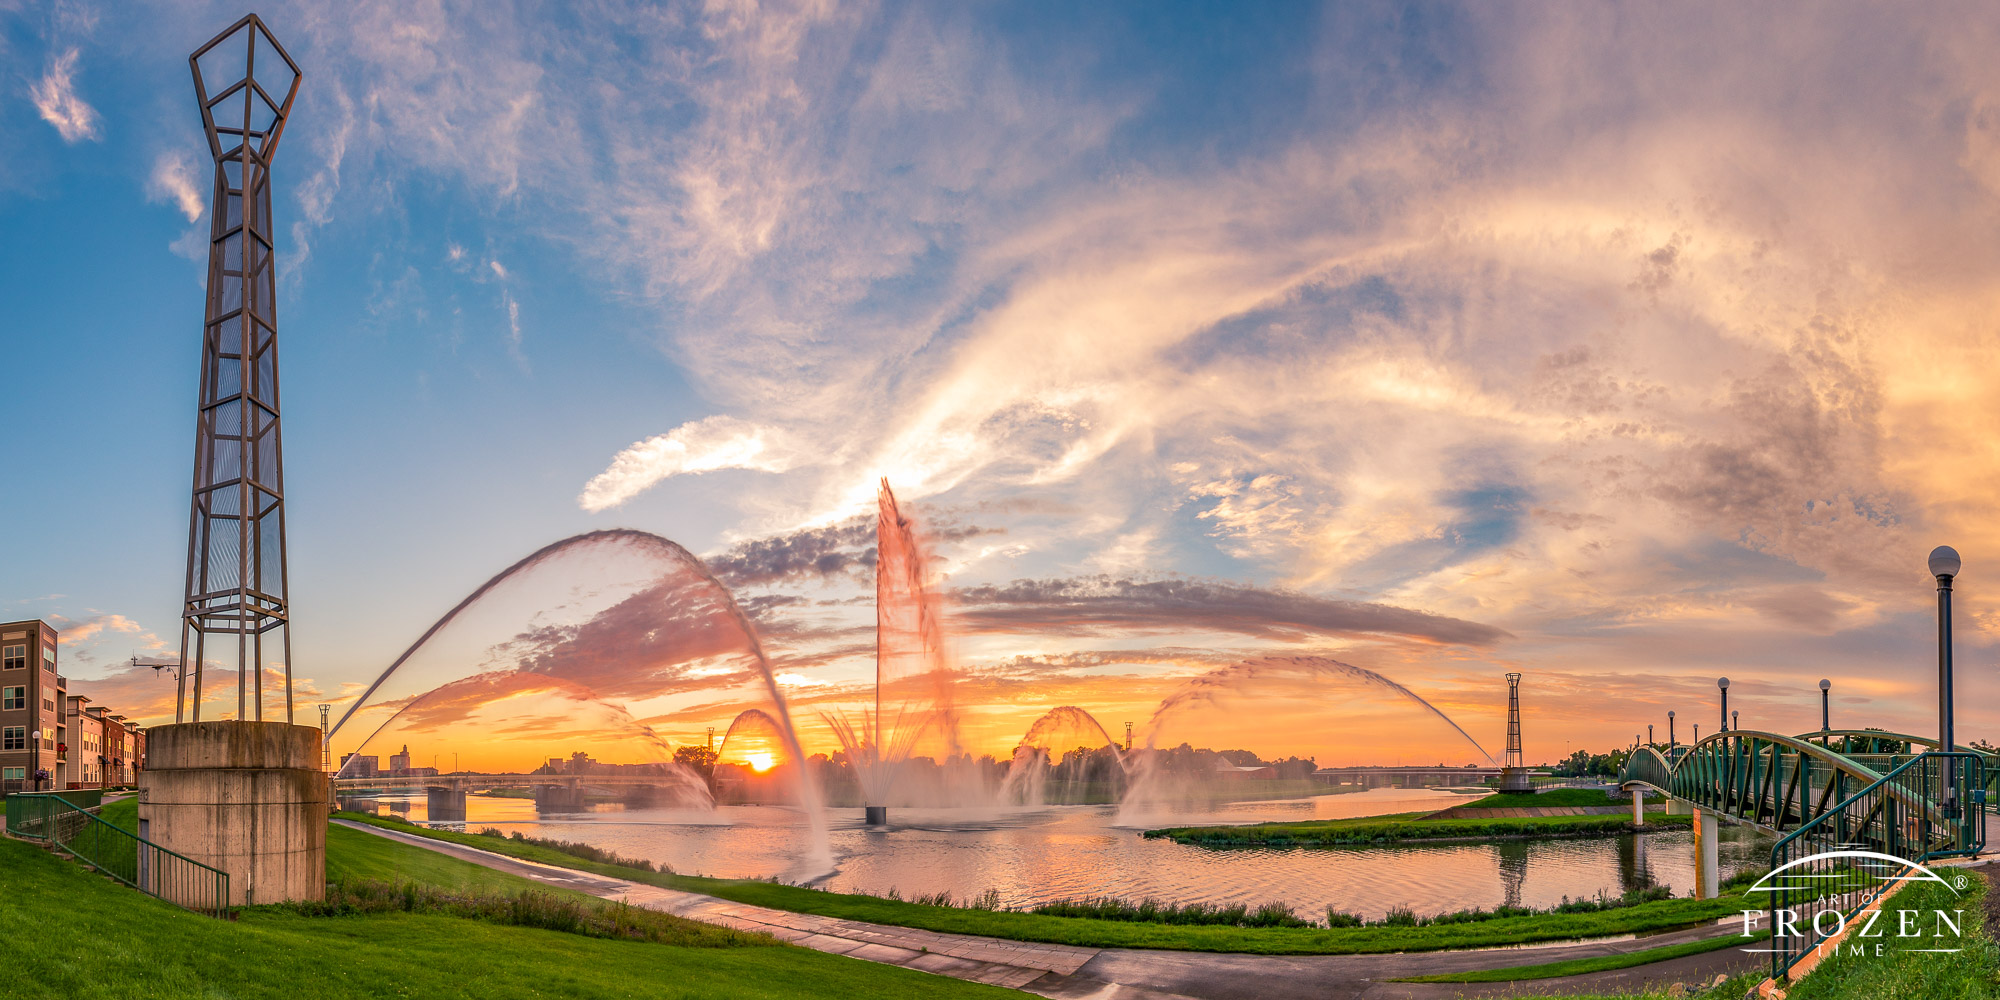 Dayton’s Fountain of Lights panorama erupting during colorful sunset where the fountain sprays catch the warm sunlight